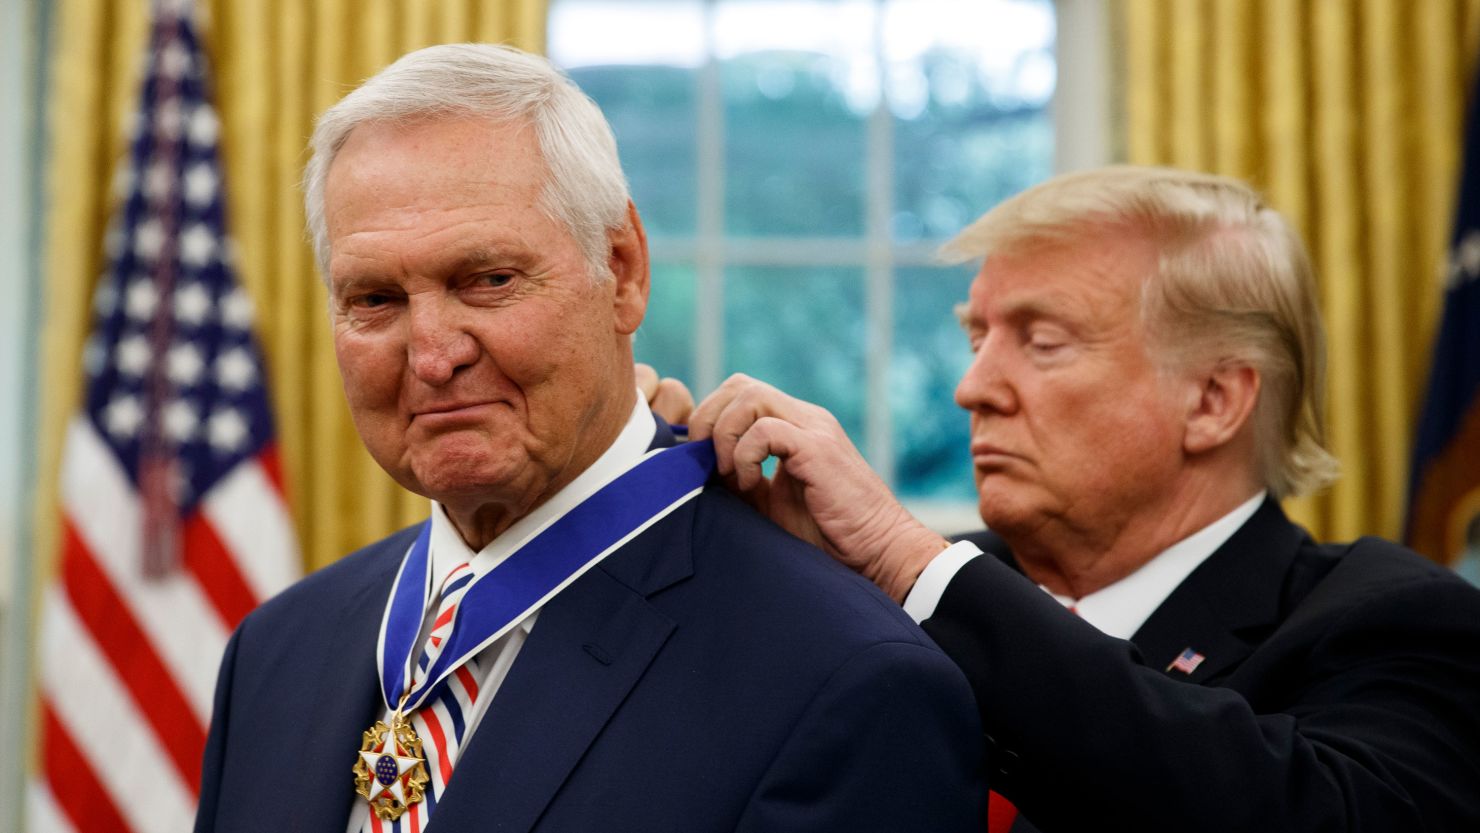 President Donald Trump presents the Presidential Medal of Freedom to former NBA basketball player and general manager Jerry West, in the Oval Office of the White House, Thursday, September 5, 2019. 